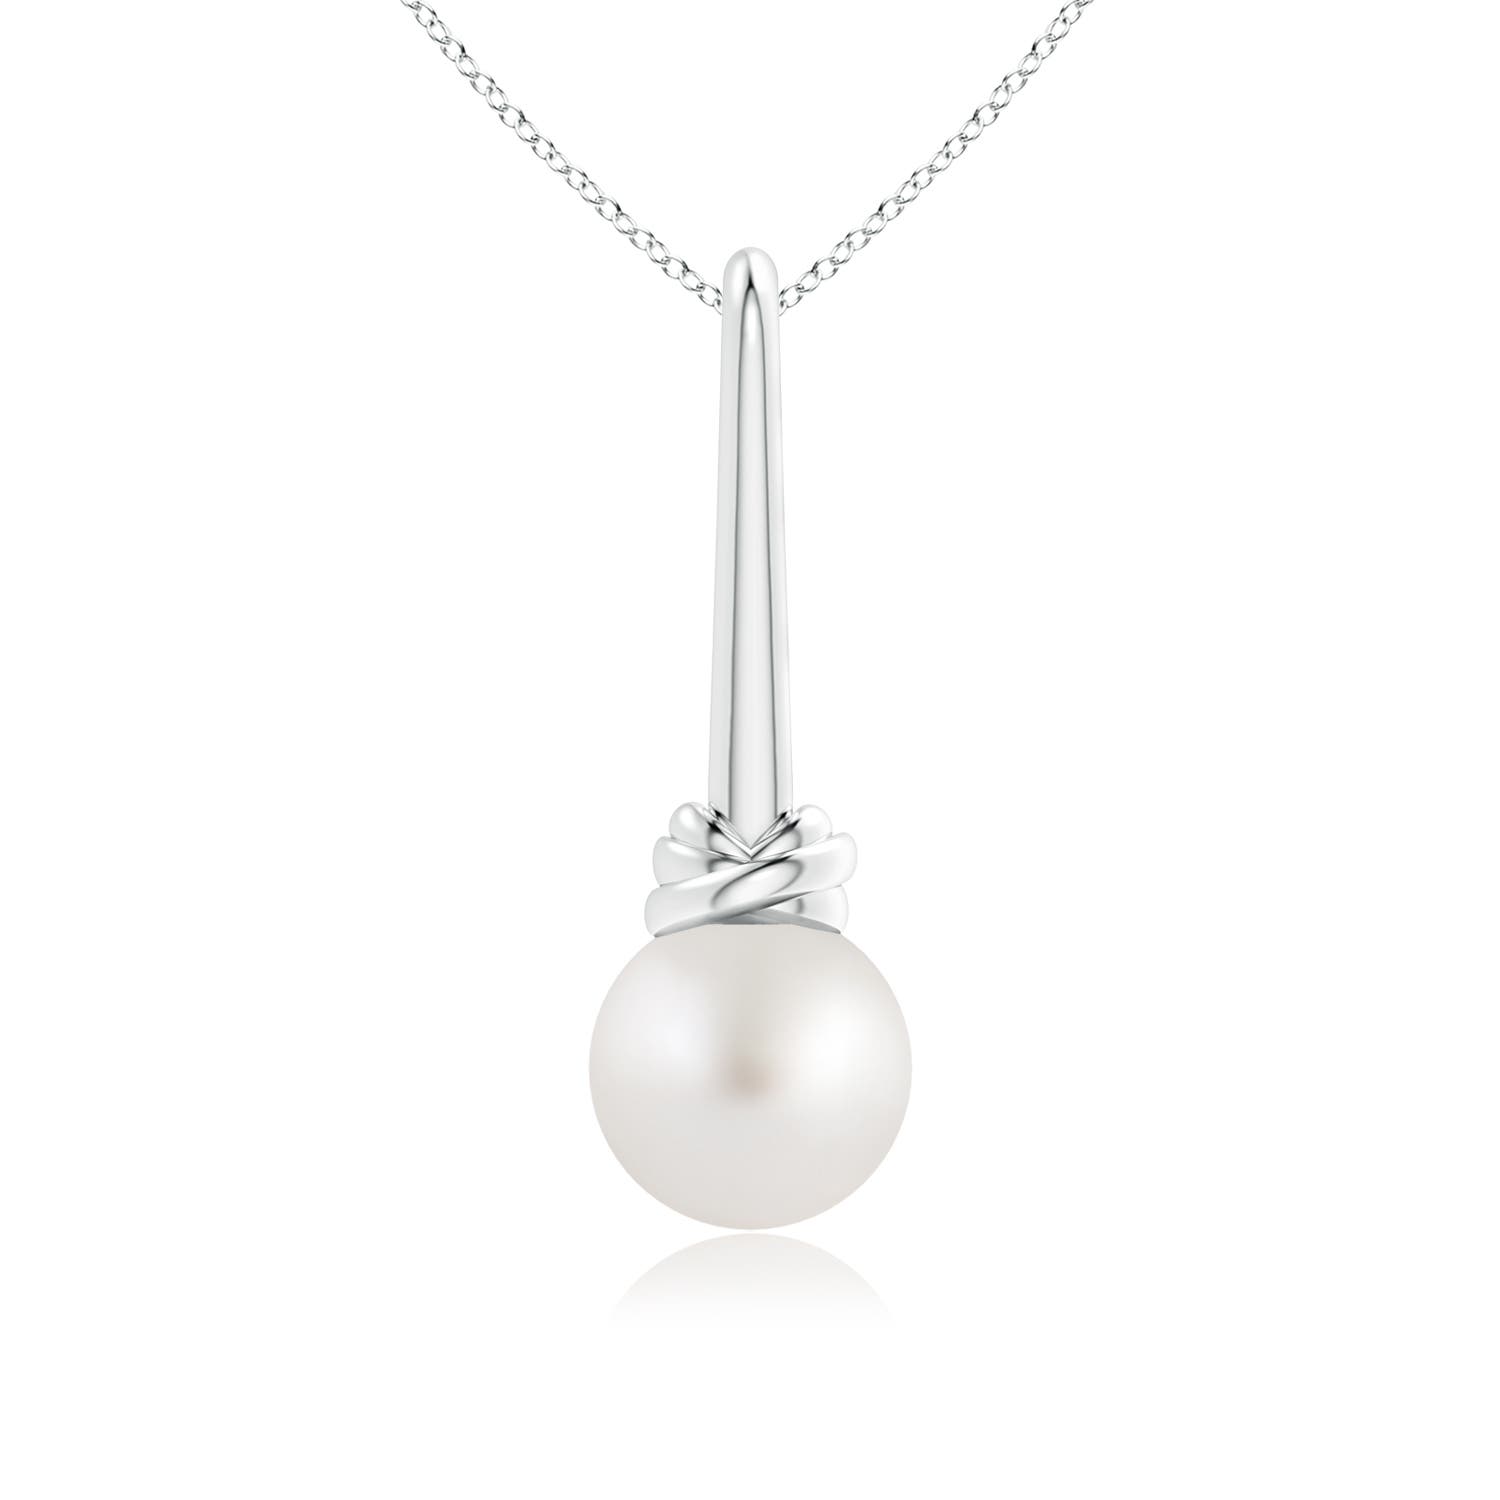 AA - South Sea Cultured Pearl / 5.25 CT / 14 KT White Gold